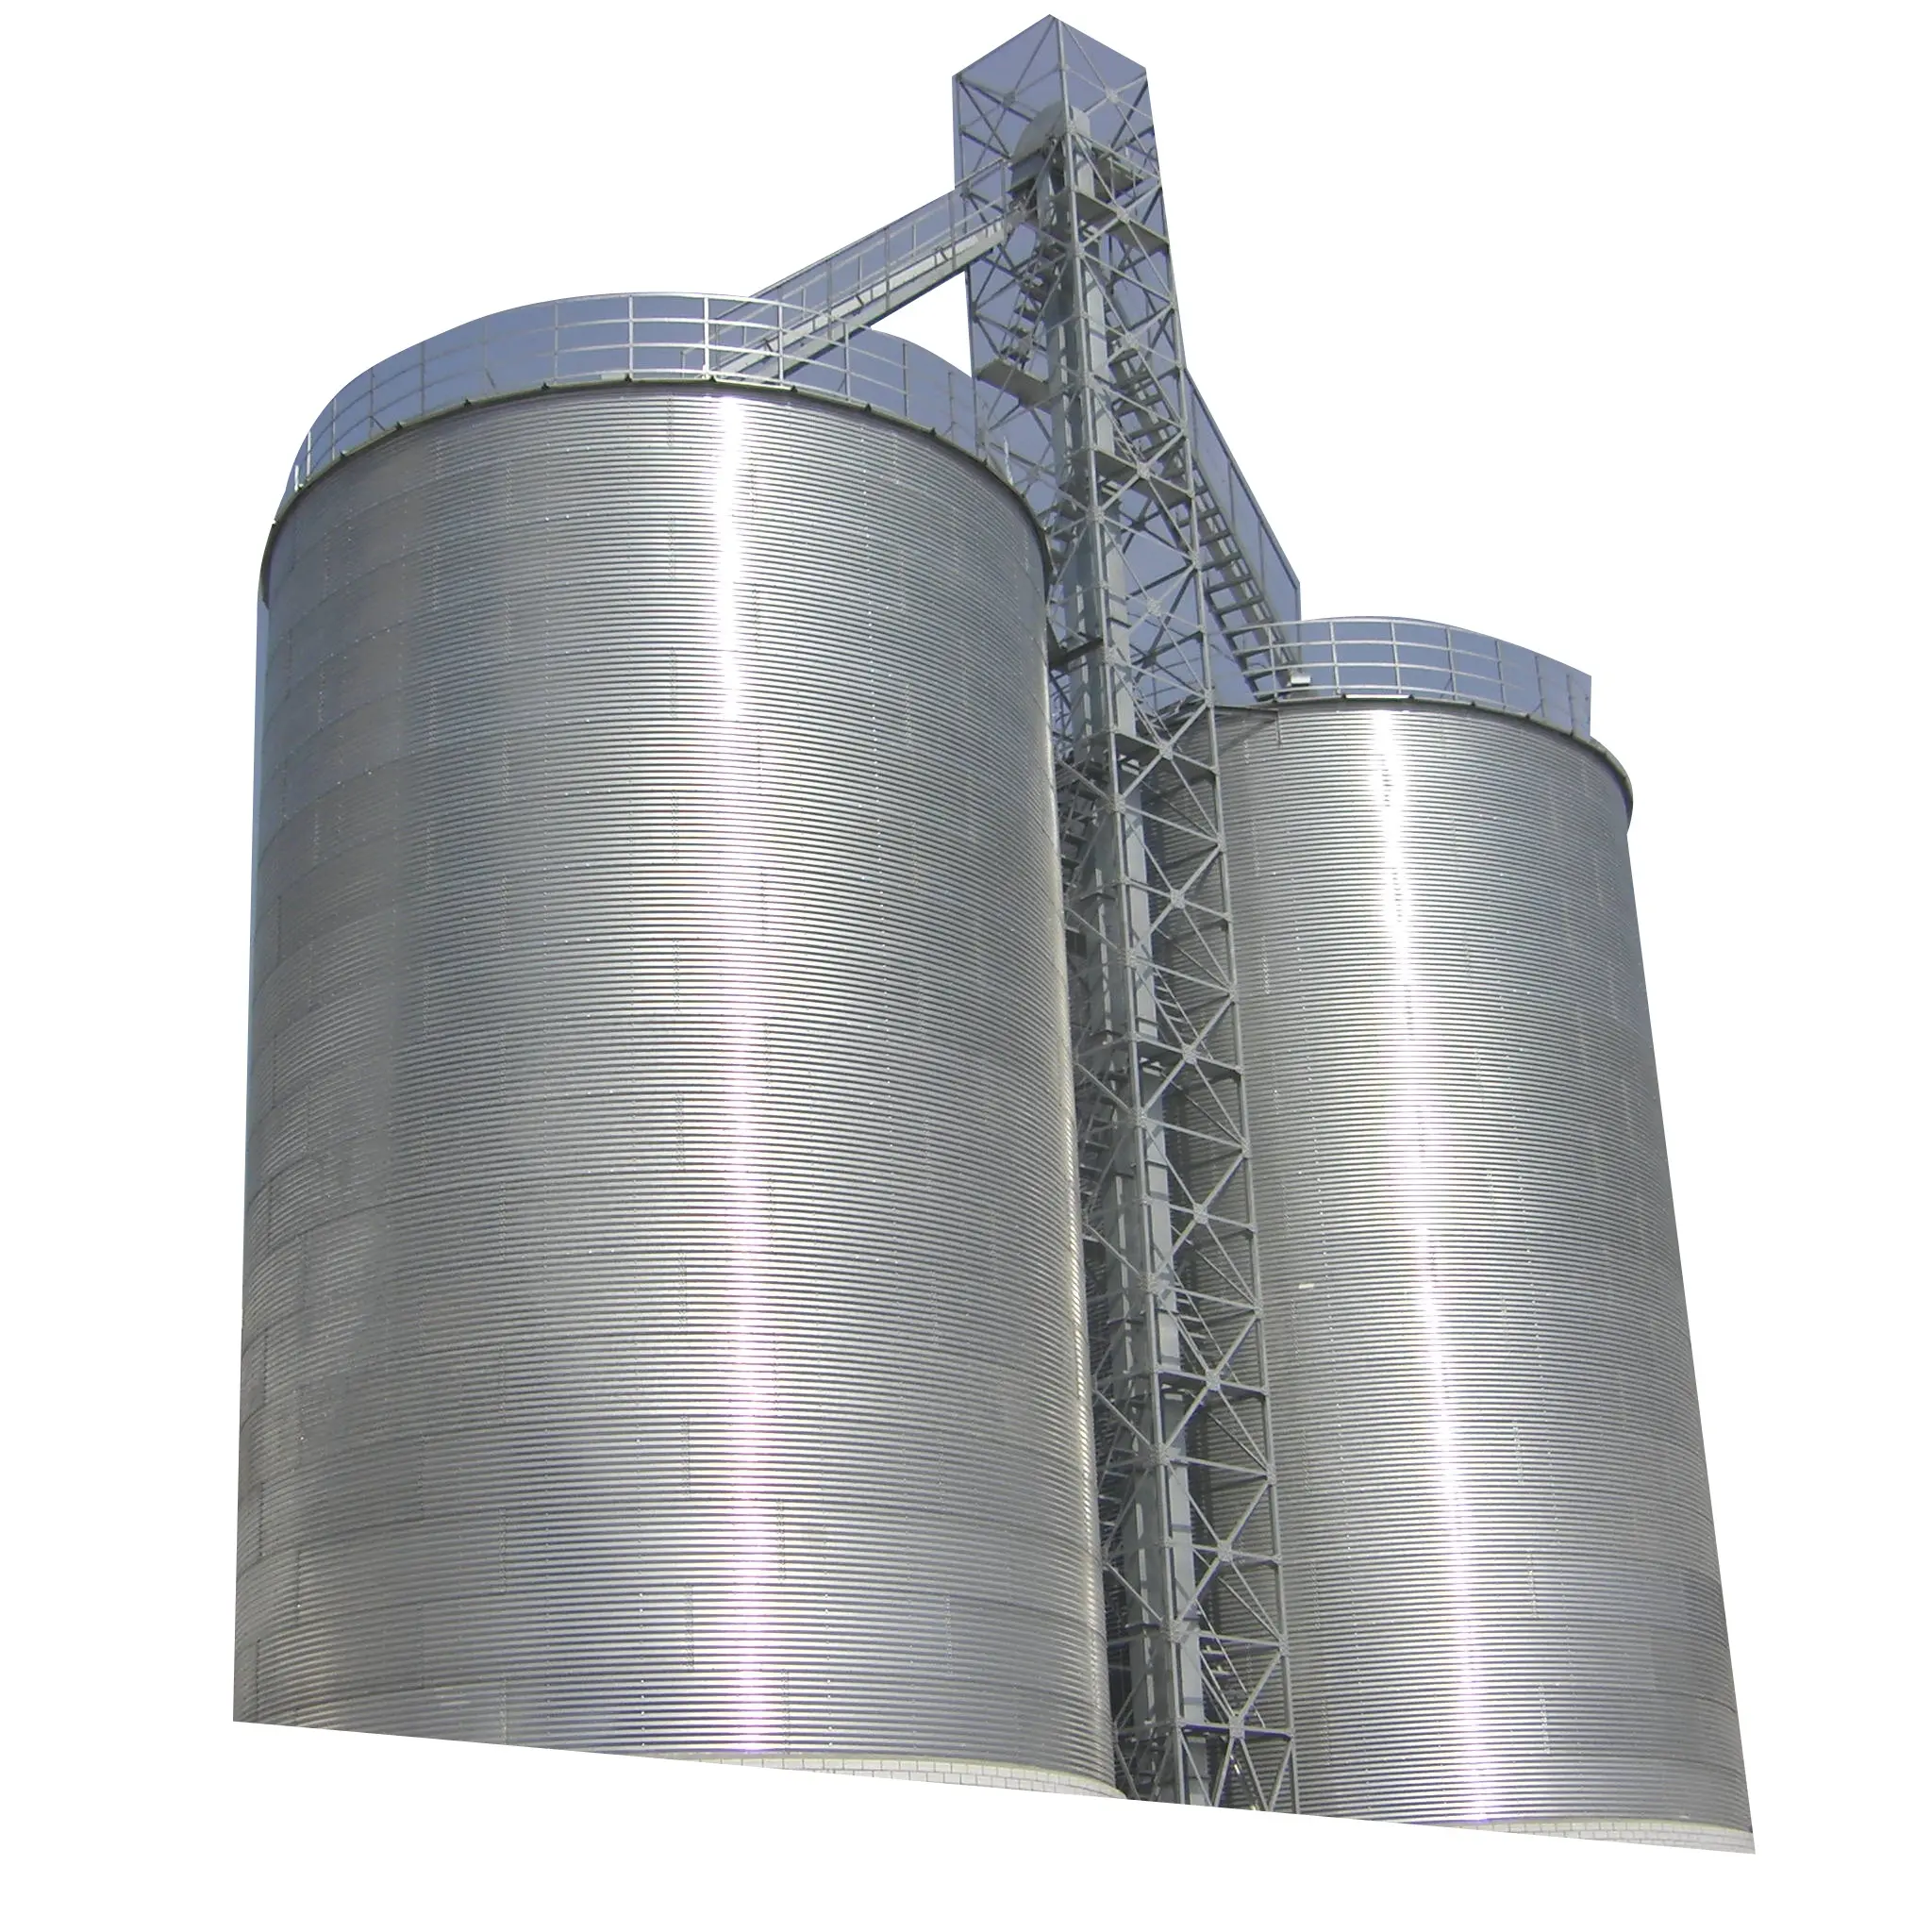 Corn storage steel silos with flat bottom silos equipped with sweep auger